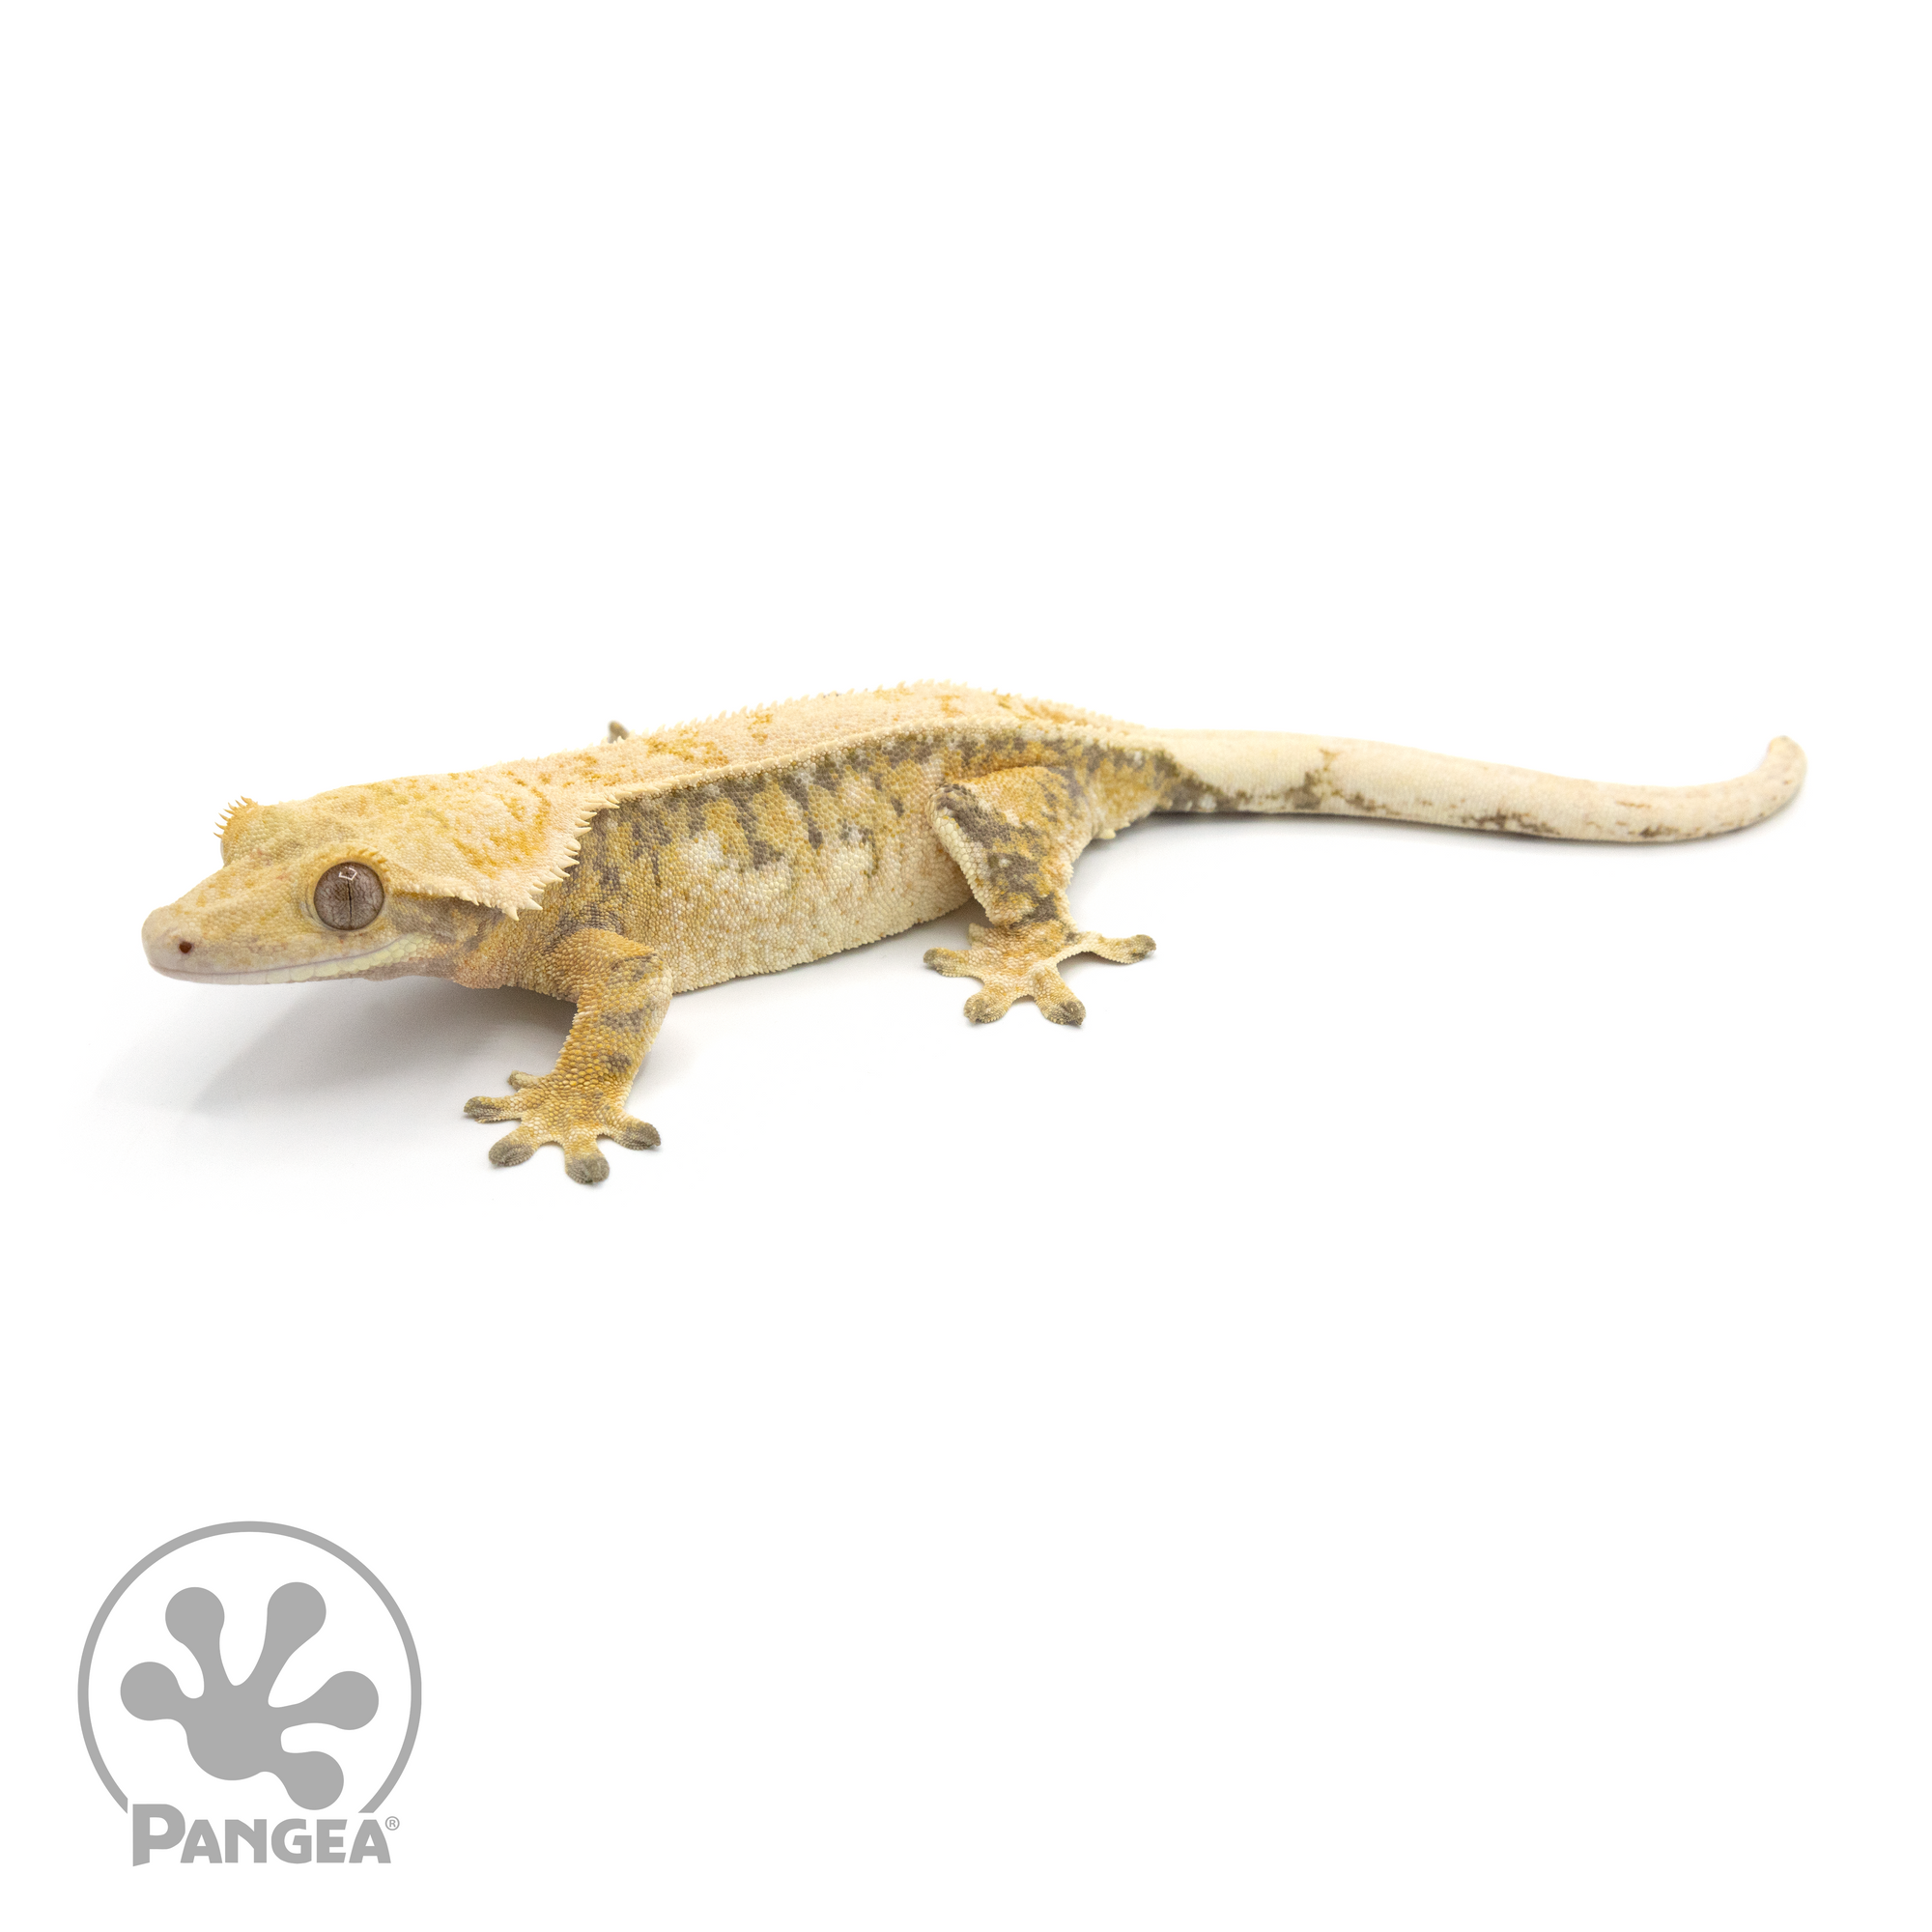 Female Tricolor Extreme Harlequin Crested Gecko Cr-1356 looking left 